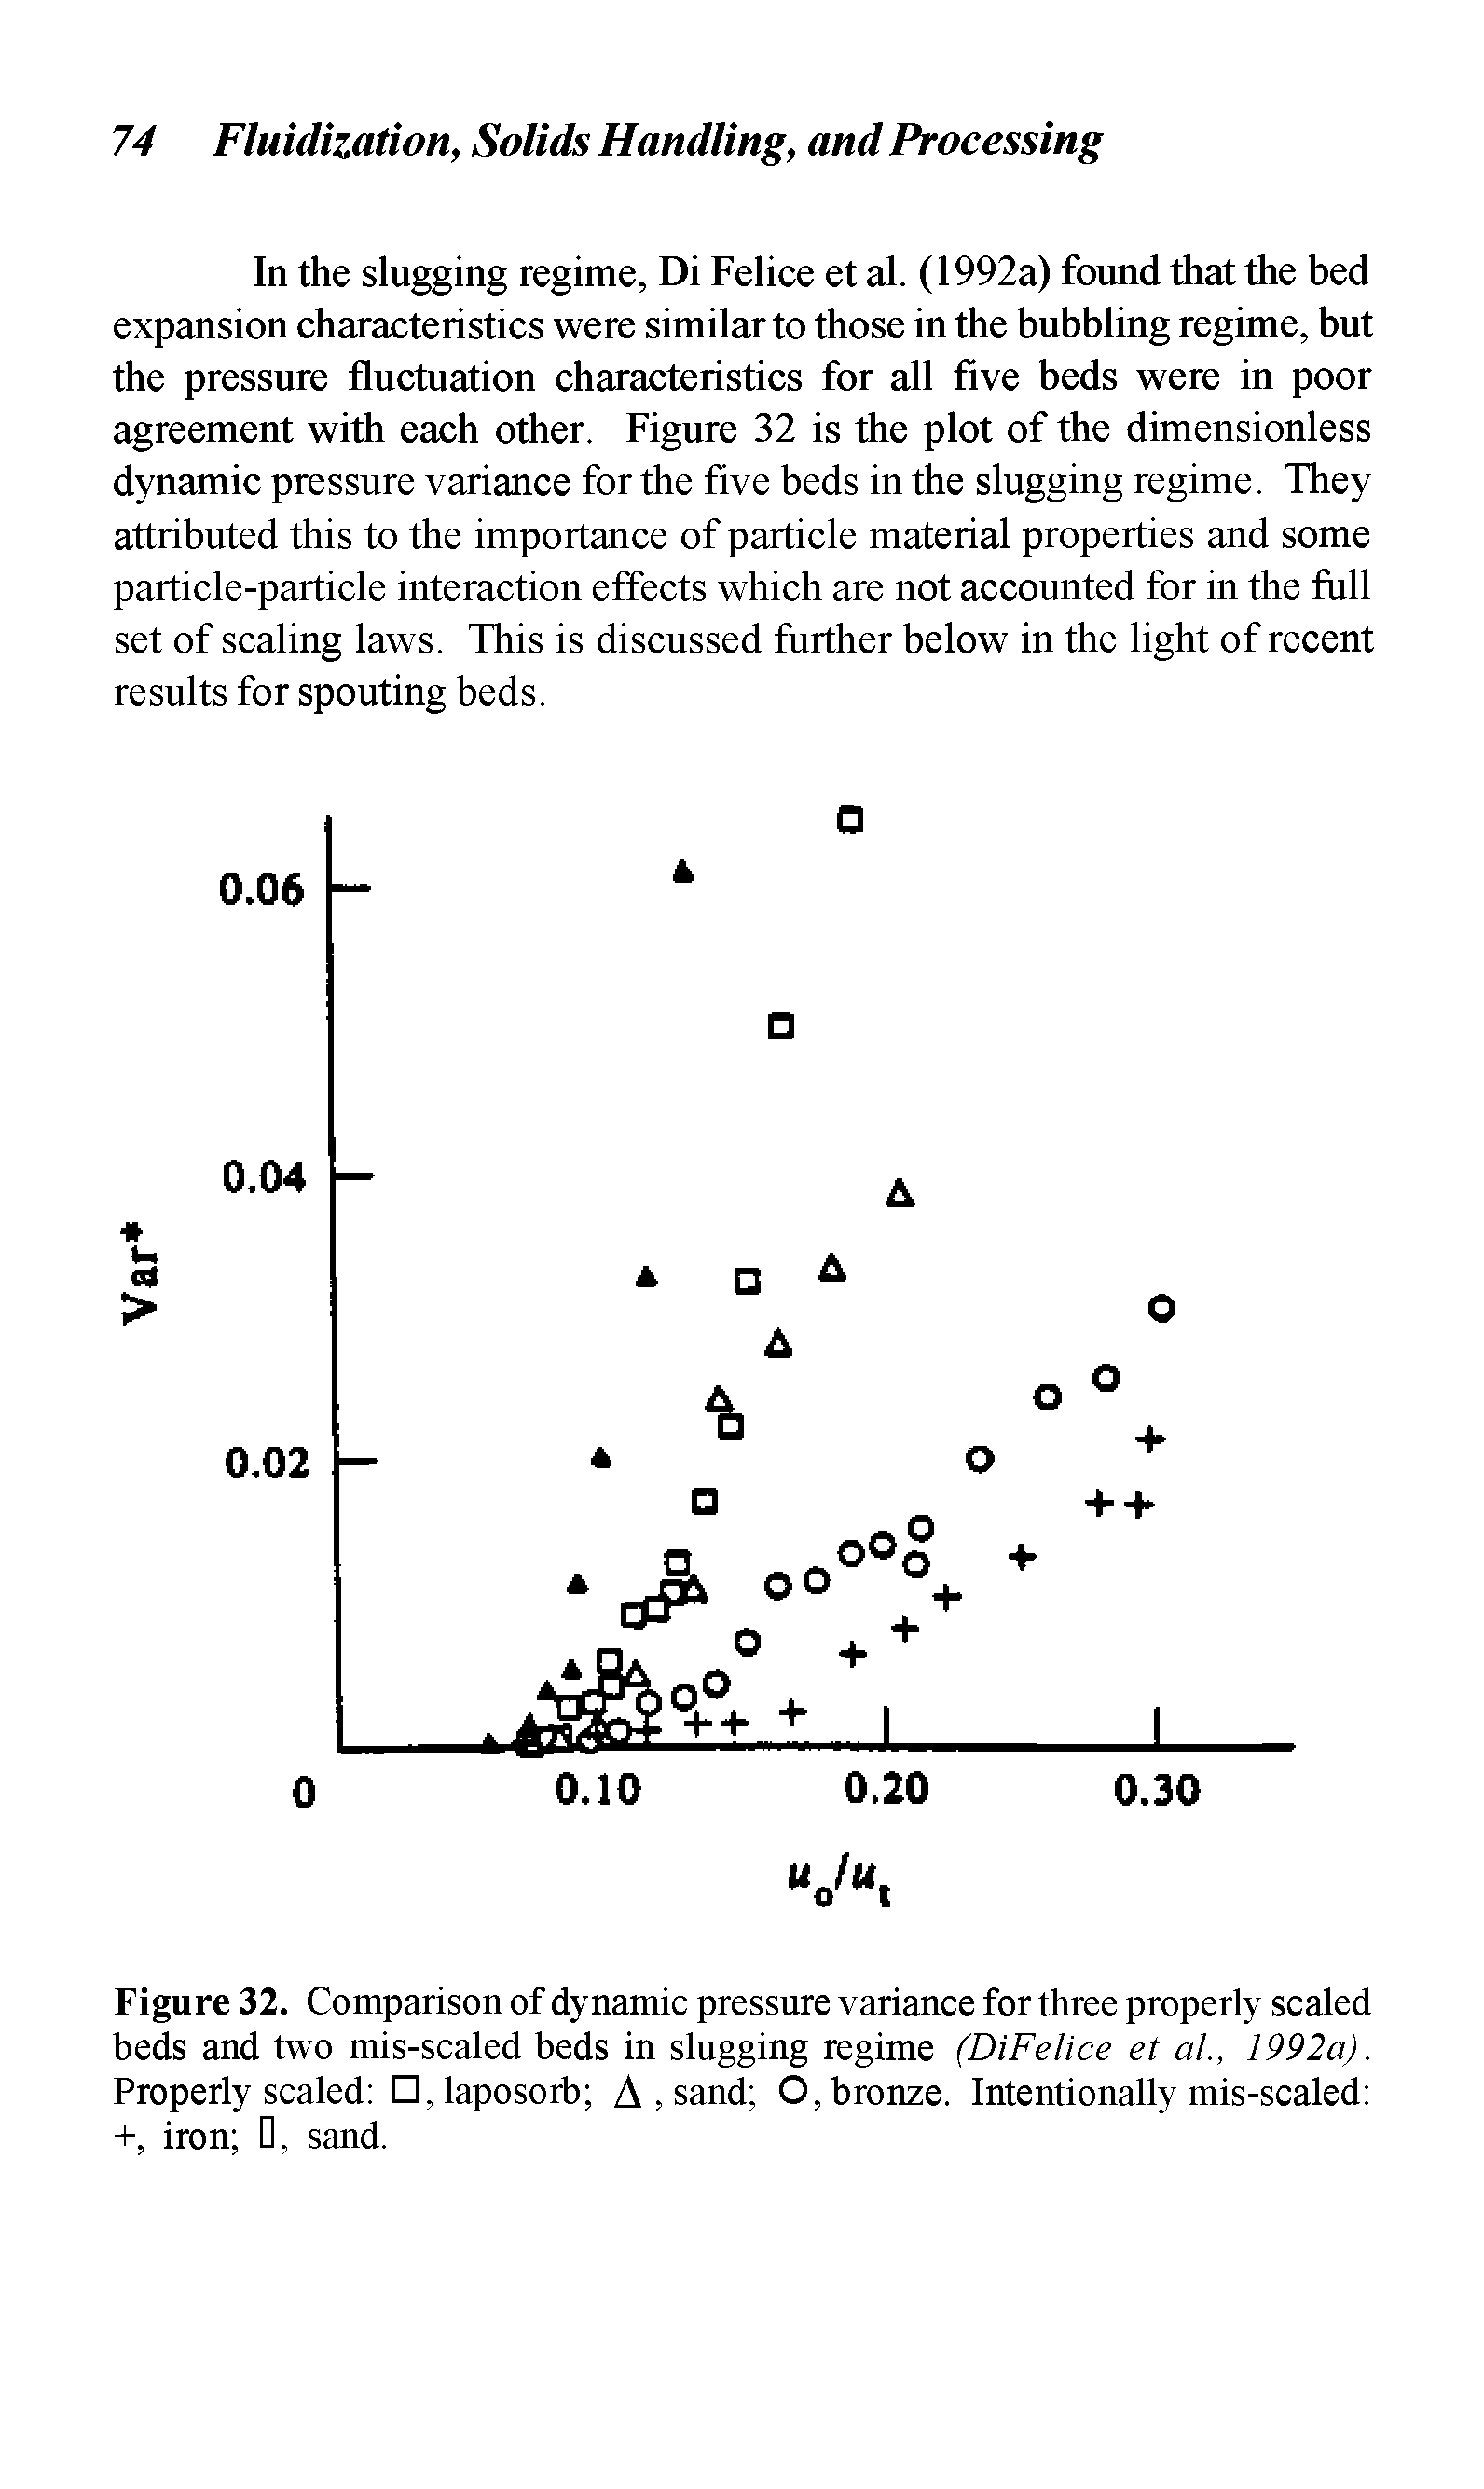 Figure 32. Comparison of dynamic pressure variance for three properly scaled beds and two mis-scaled beds in slugging regime (DiFelice et al., 1992a). Properly scaled Cflaposorb A, sand O, bronze. Intentionally mis-scaled +, iron , sand.